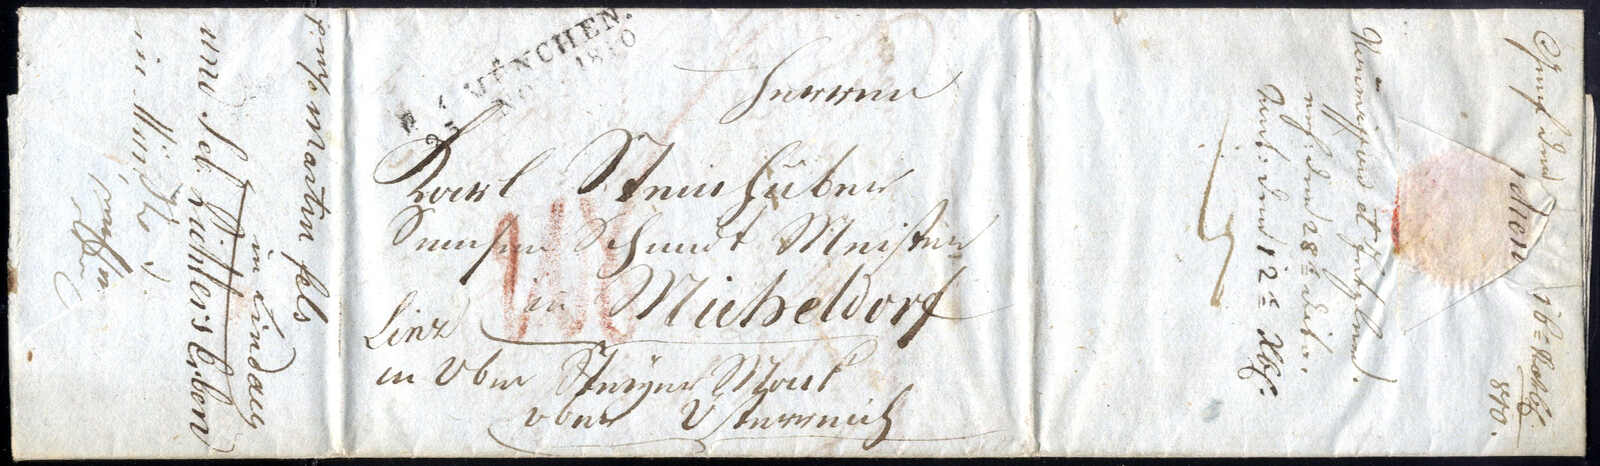 Lot 1883 - europe Austria Early Pre Philatelic letters and Documents -  Viennafil Auktionen Auction #66 Worldwide Mail Auction: Italy, Austria, Germany, Europe and Overseas